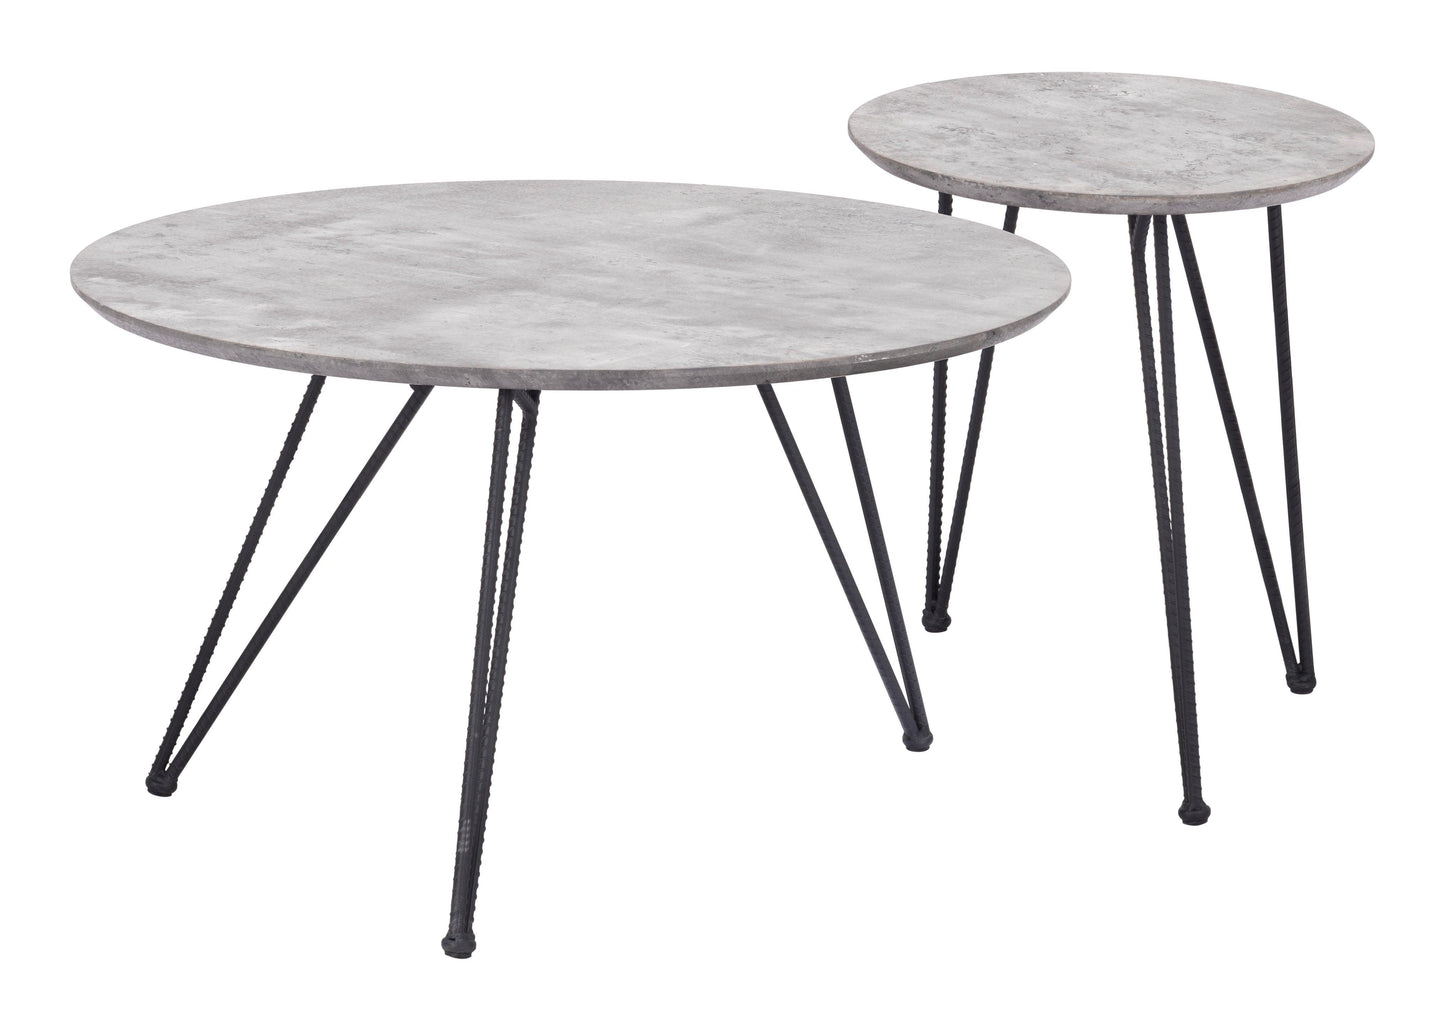 Kerris Coffee Table Set Gray & Black - Sideboards and Things Brand_Zuo Modern, Color_Black, Color_Gray, Depth_30-40, Finish_Powder Coated, Height_10-20, Materials_Metal, Materials_Wood, Metal Type_Steel, Product Type_Coffee Table, Width_30-40, Wood Species_MDF